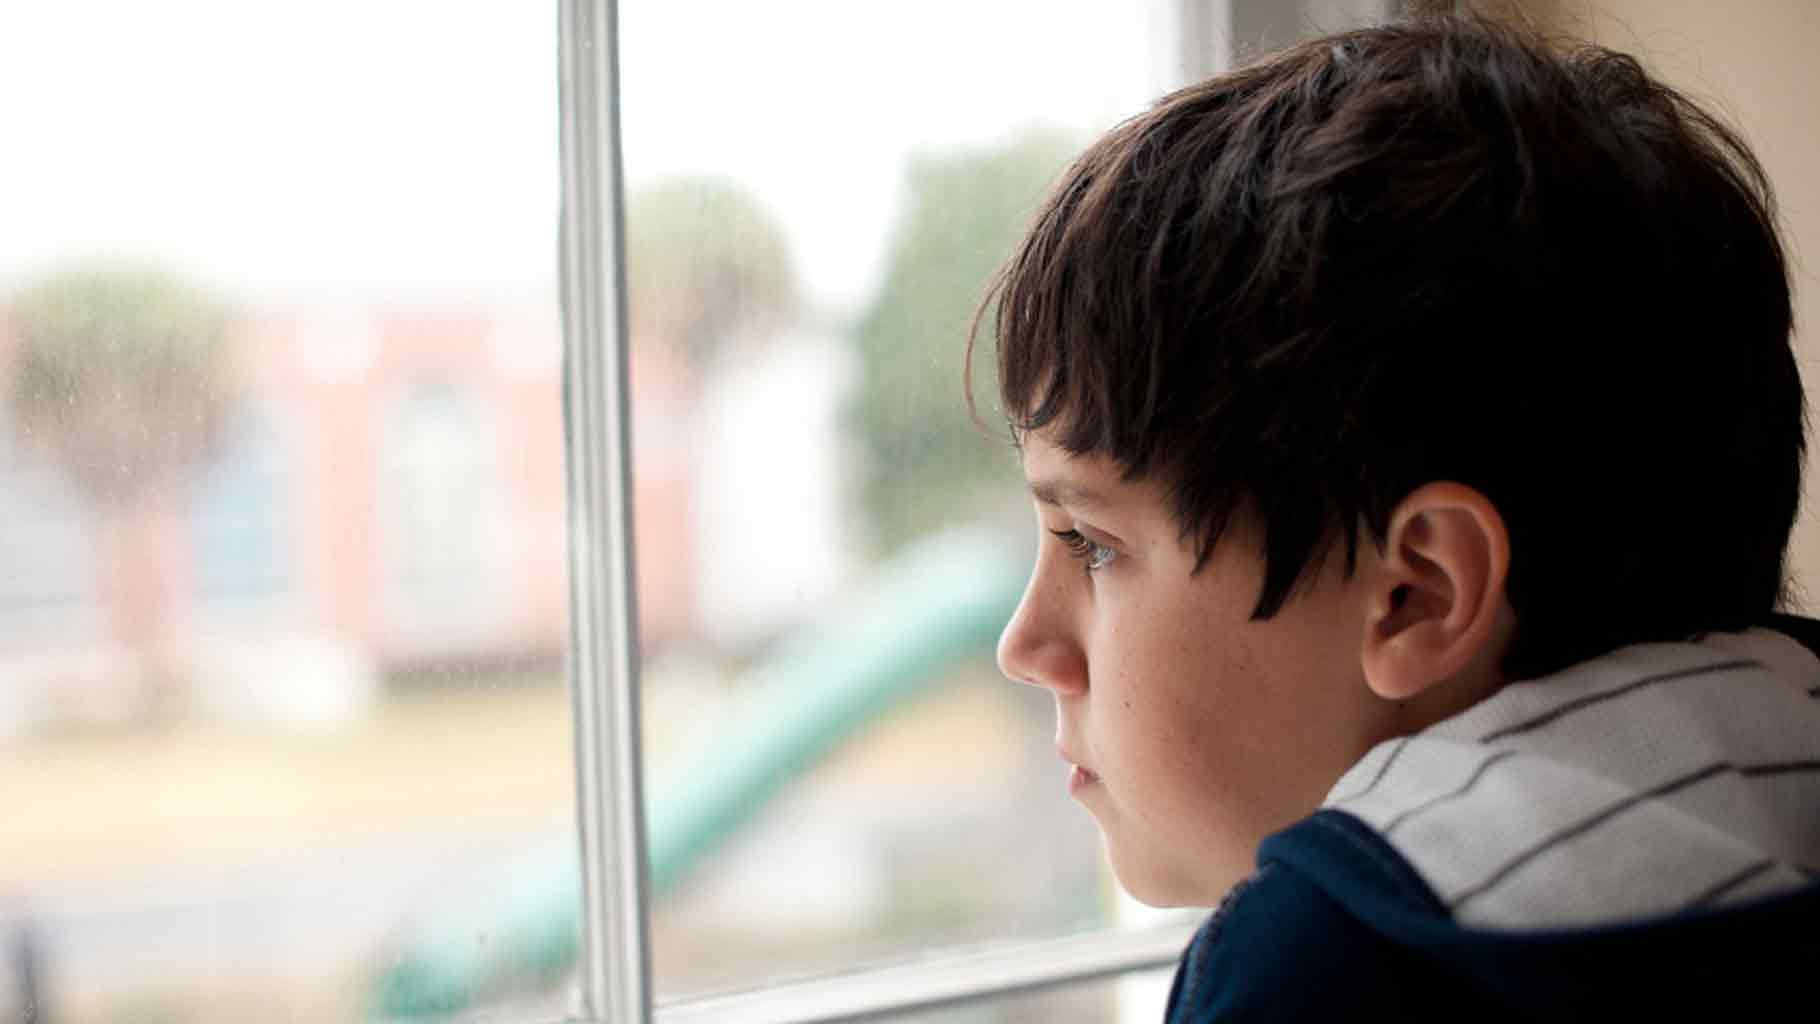 Around one in five children suffer from anxiety and depression.